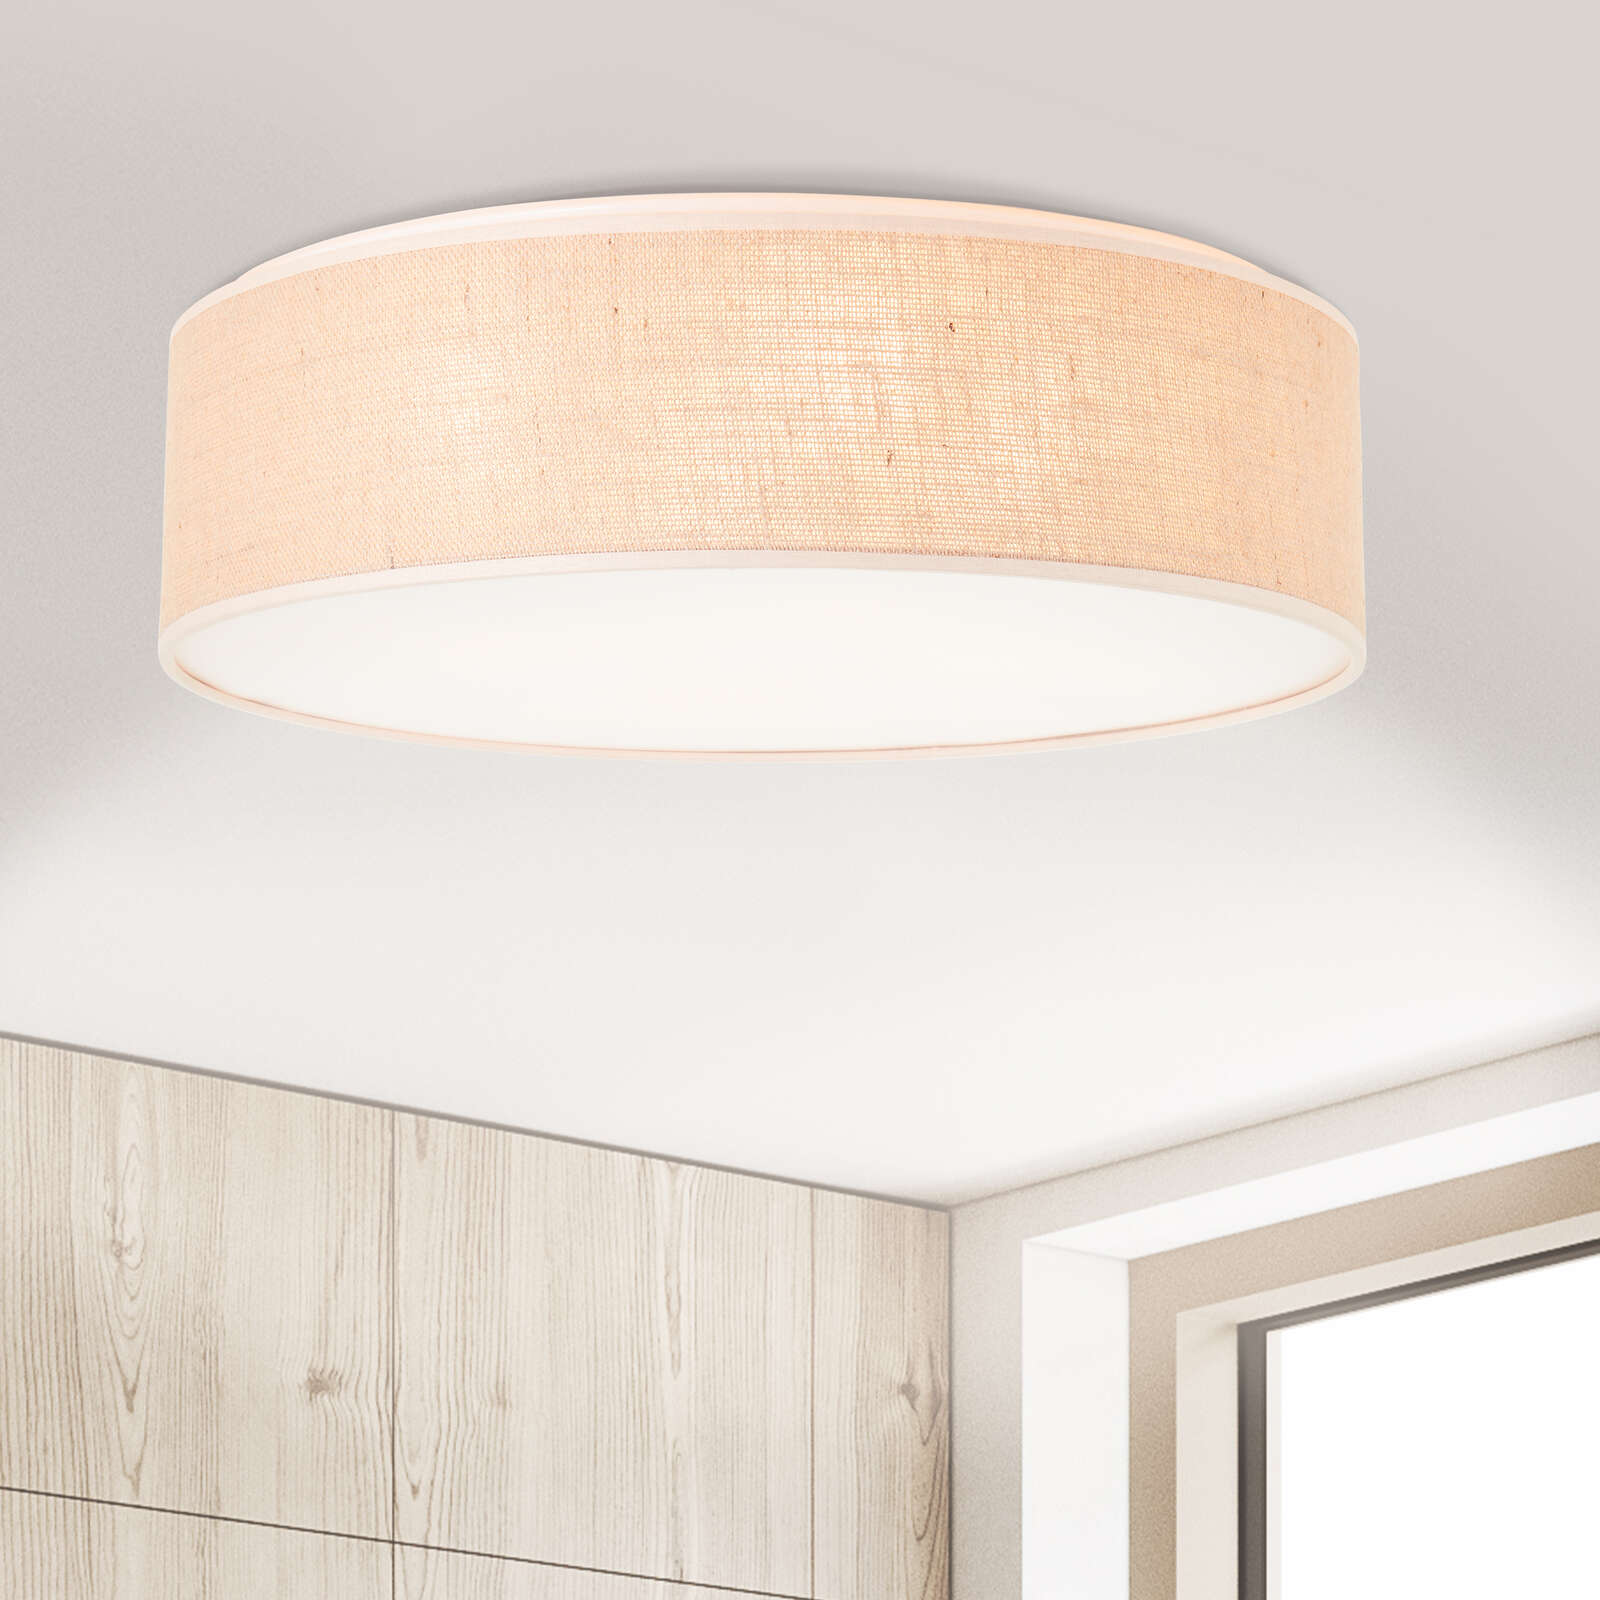             Textile ceiling light - Alicia 5 - Brown
        